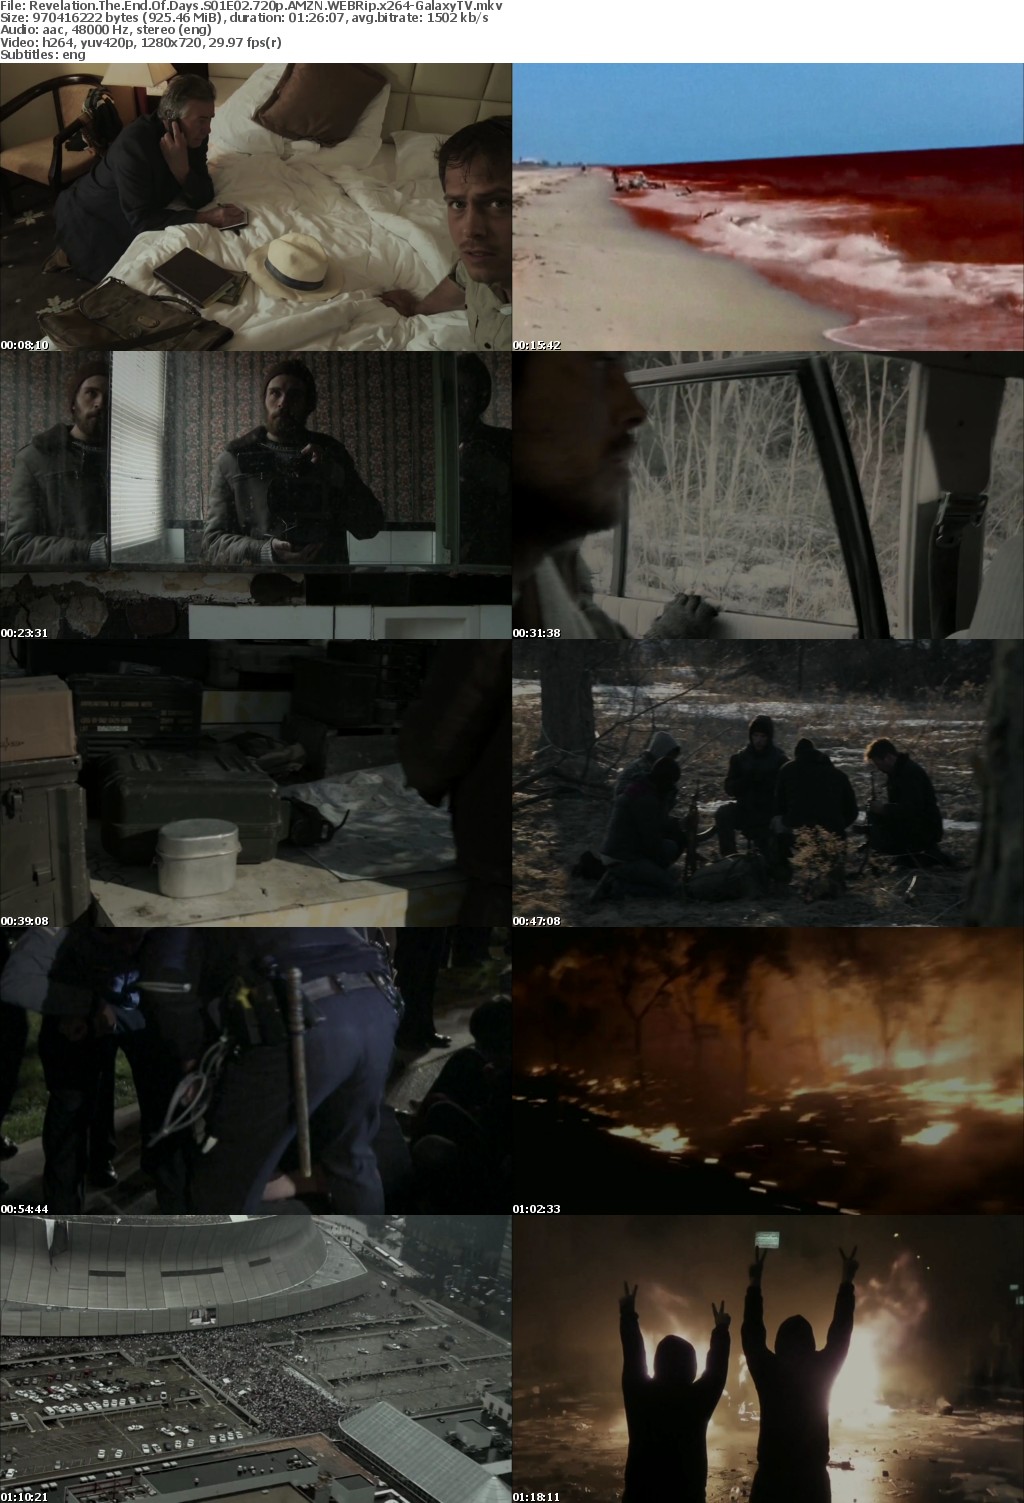 Revelation The End Of Days S01 COMPLETE 720p AMZN WEBRip x264-GalaxyTV